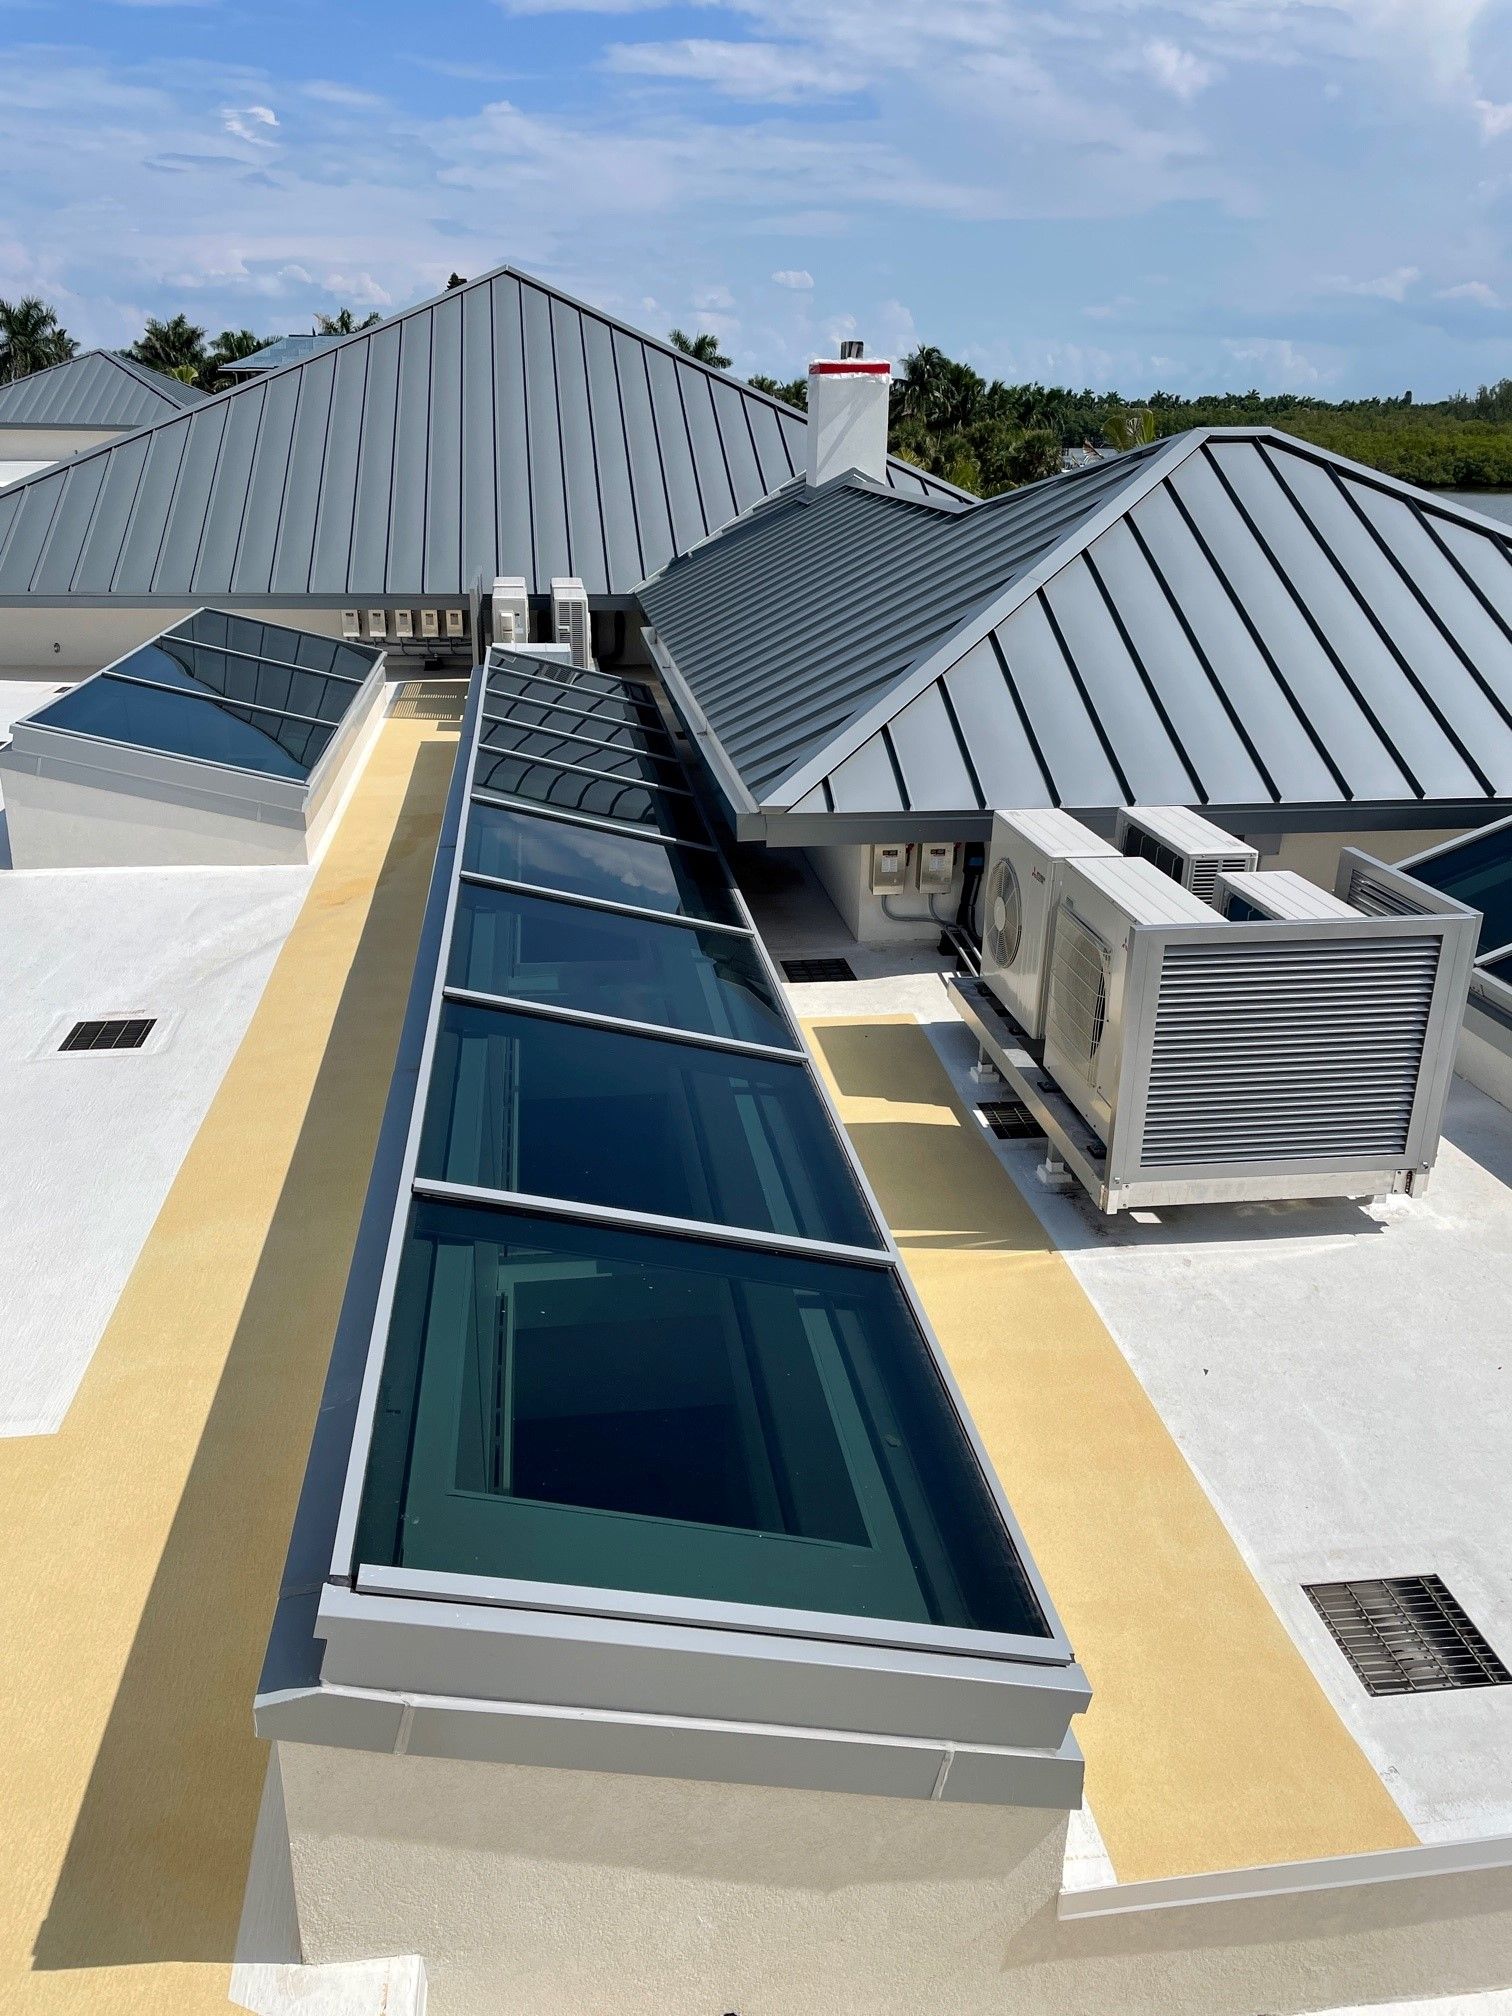 Concealed Roof Unit